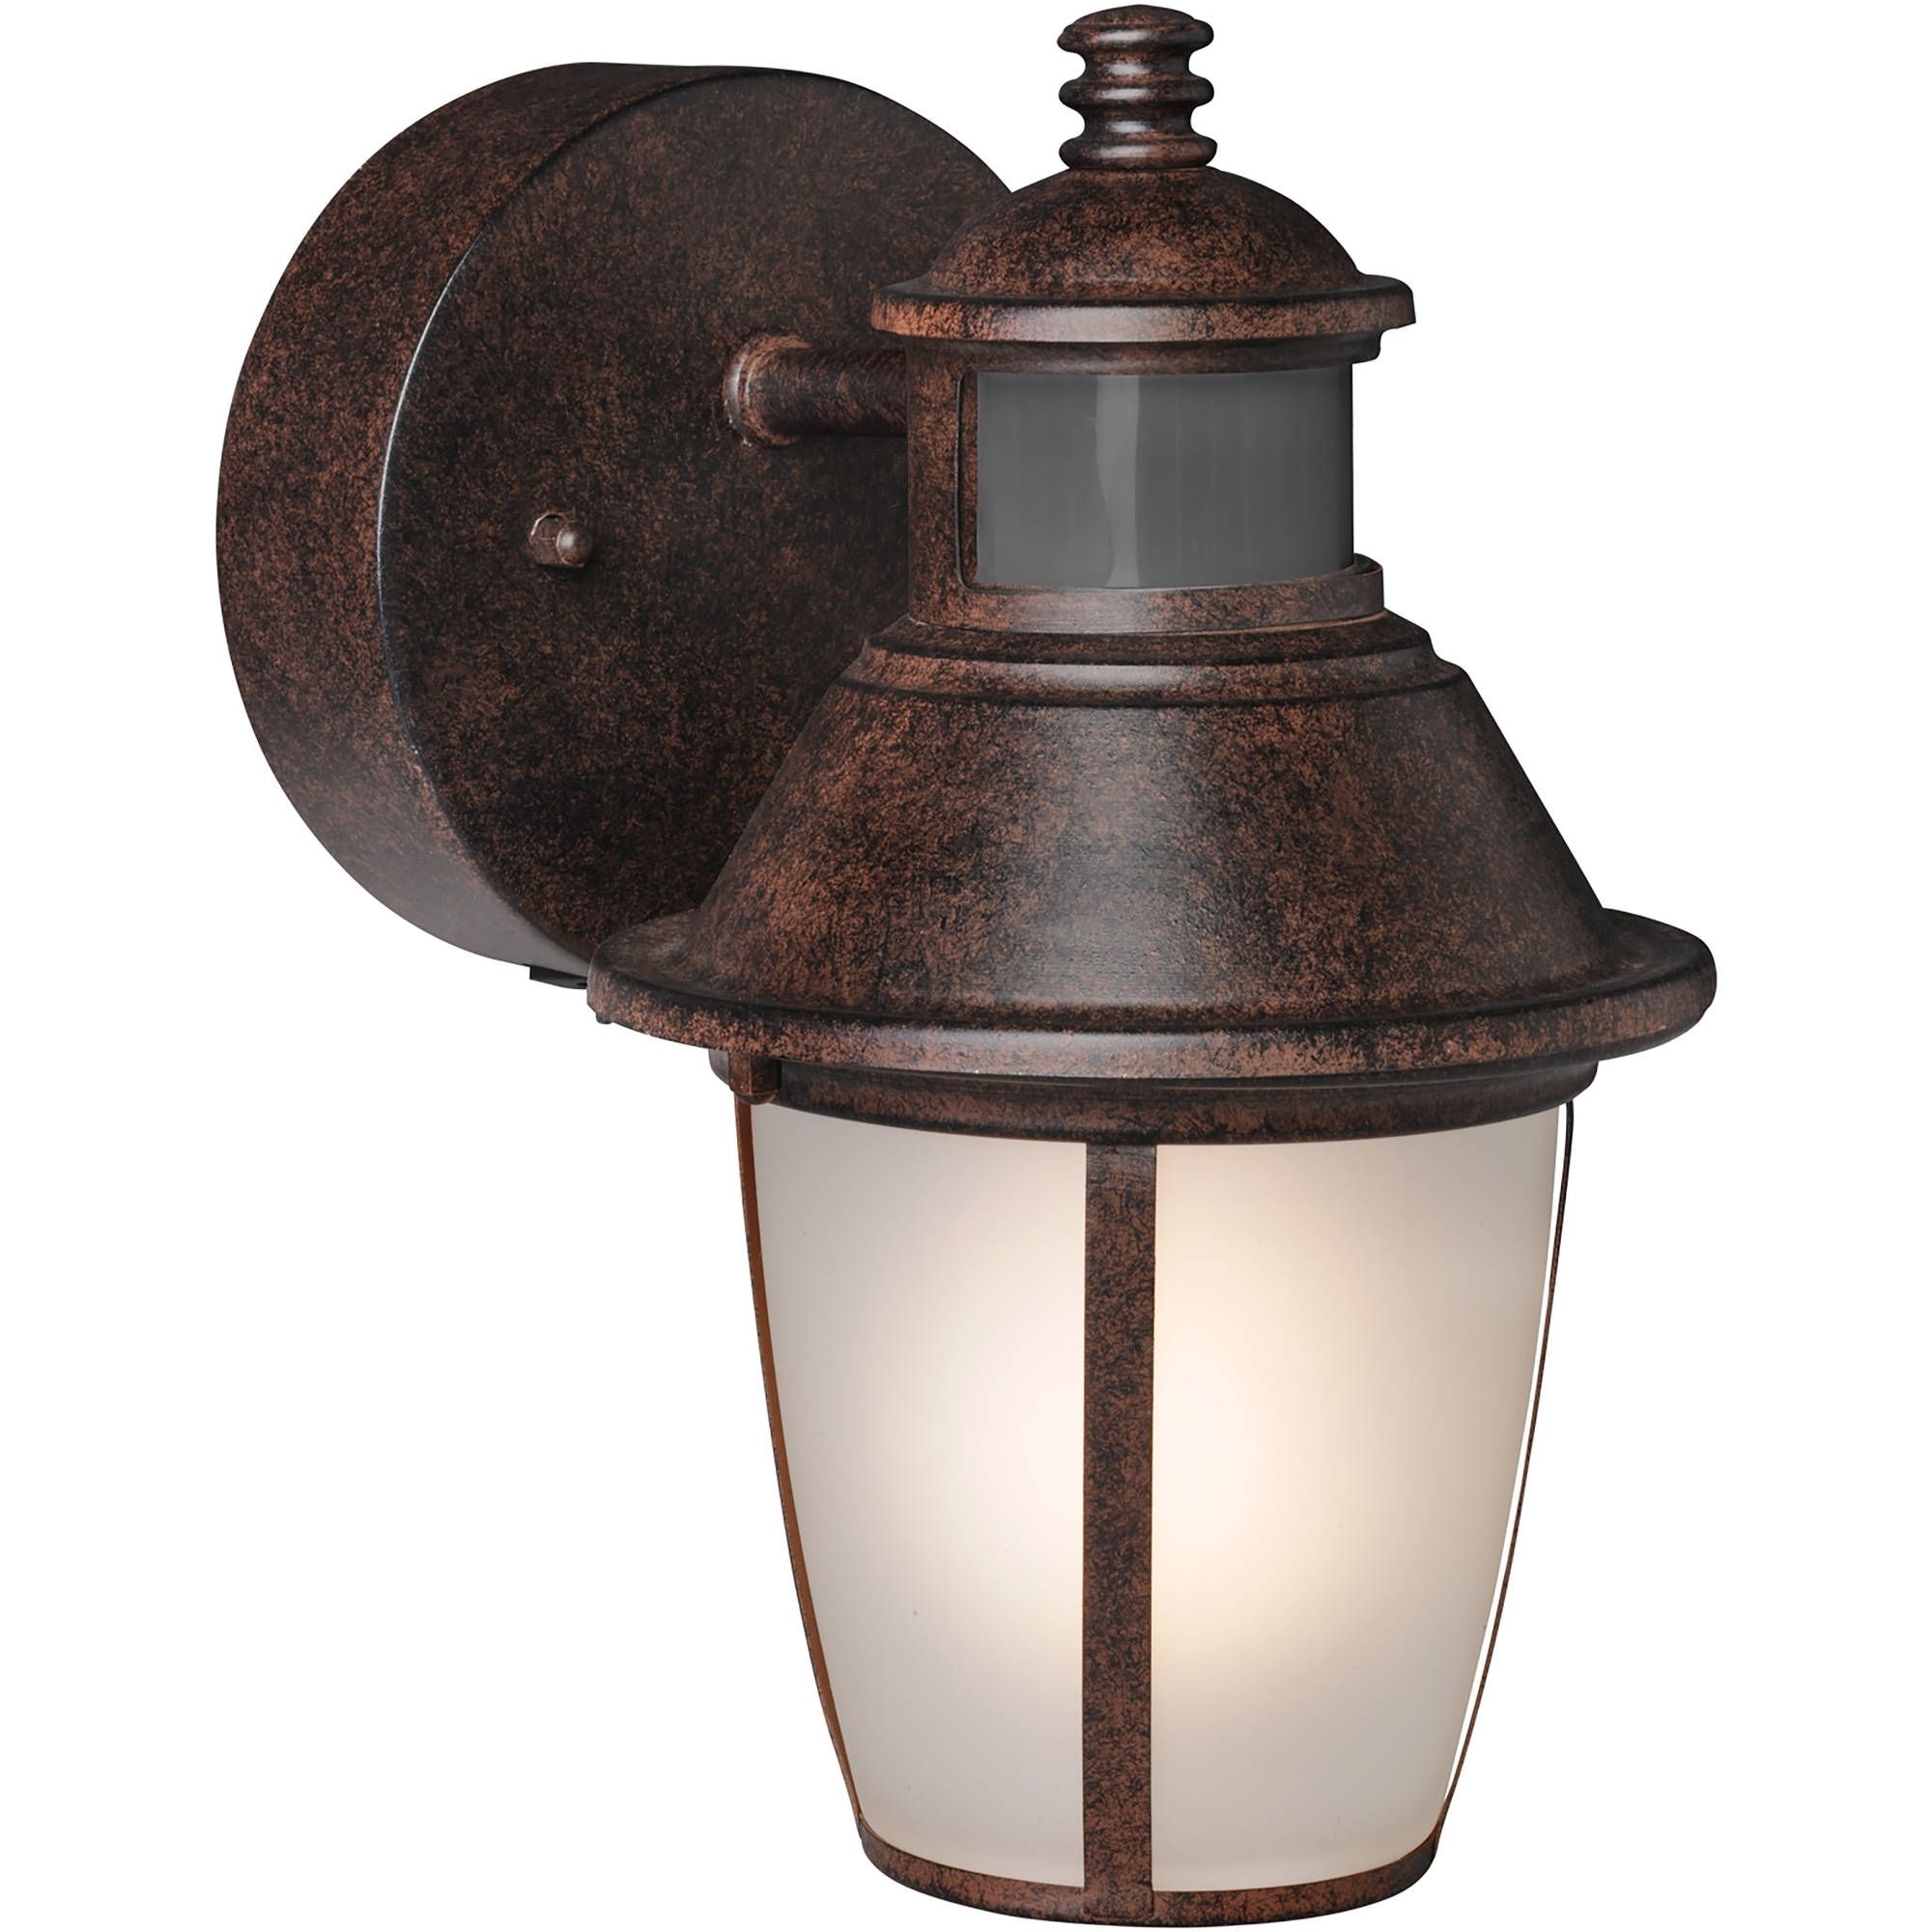 Brink's Led Outdoor Wall Lantern Motion Security Light, Bronze Intended For Outdoor Wall Lighting At Walmart (Photo 1 of 15)